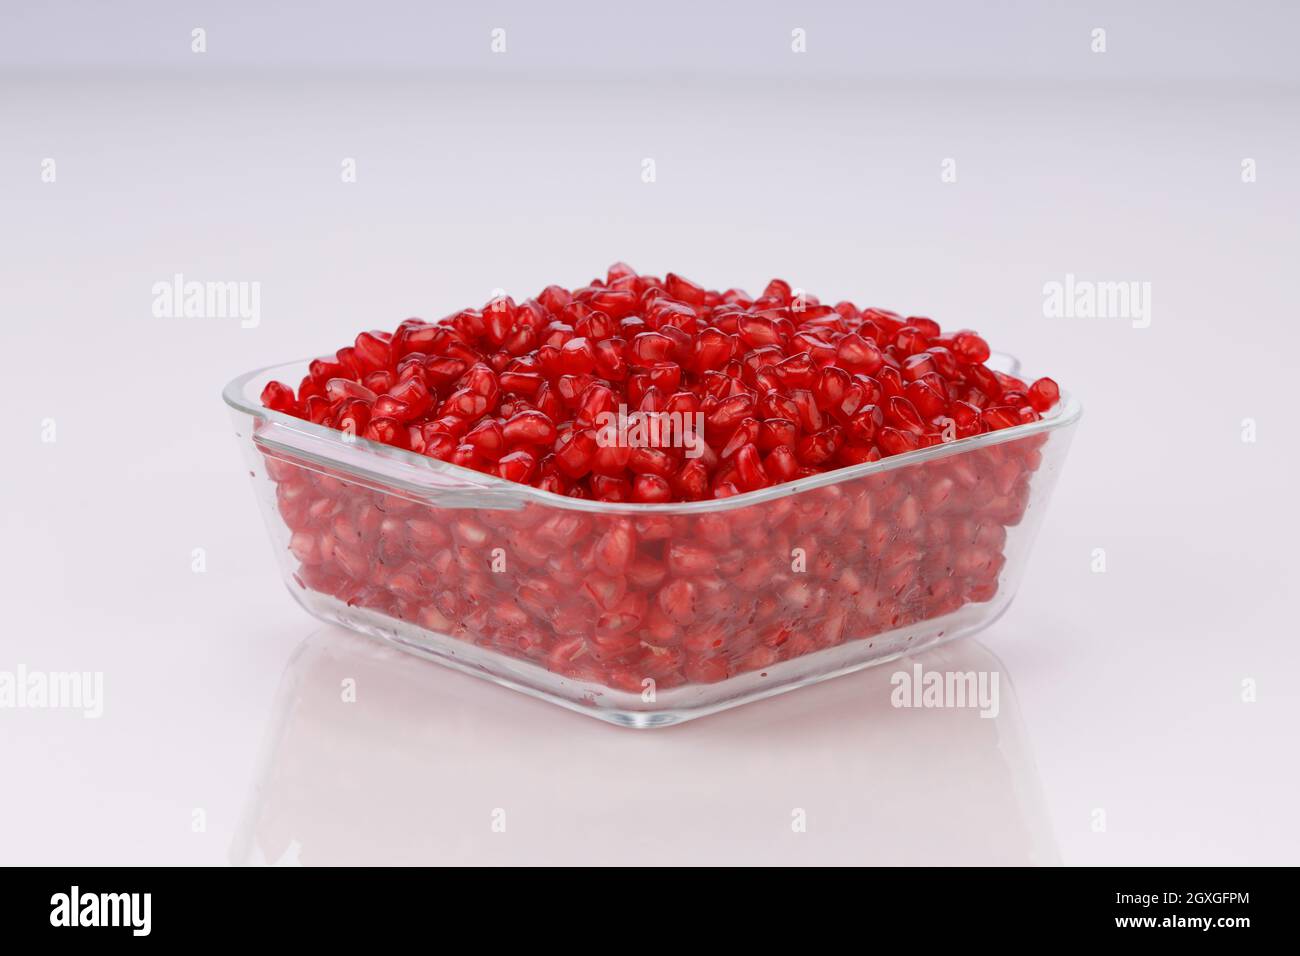 Fresh Pomegranate seed arranged in a square glass container with white background, isolated. Stock Photo